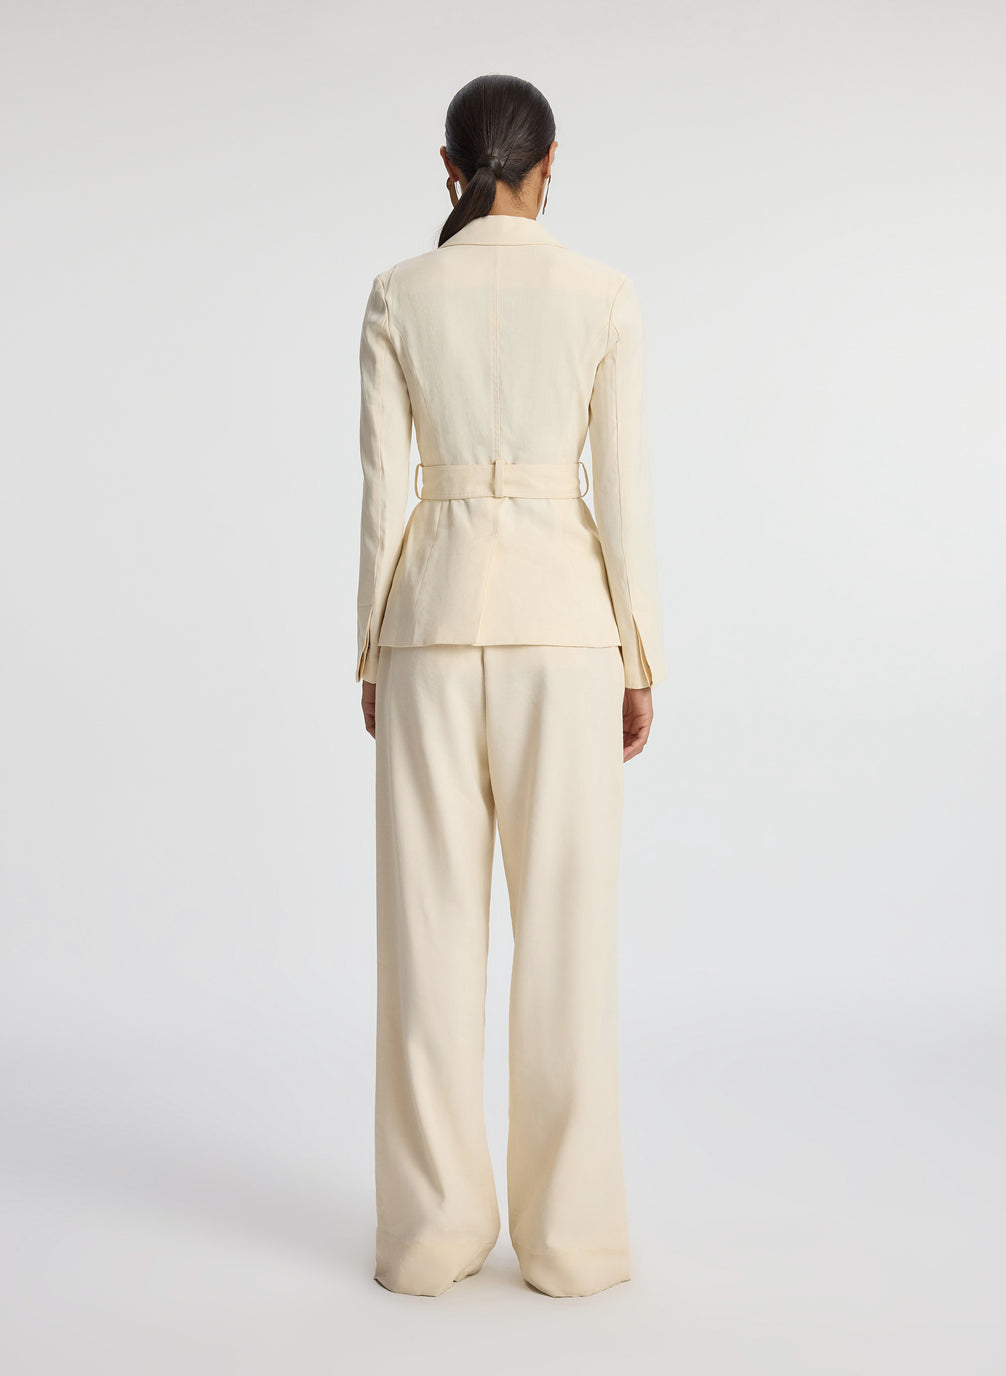 back view of woman wearing beige belted jacket and beige wide leg pants